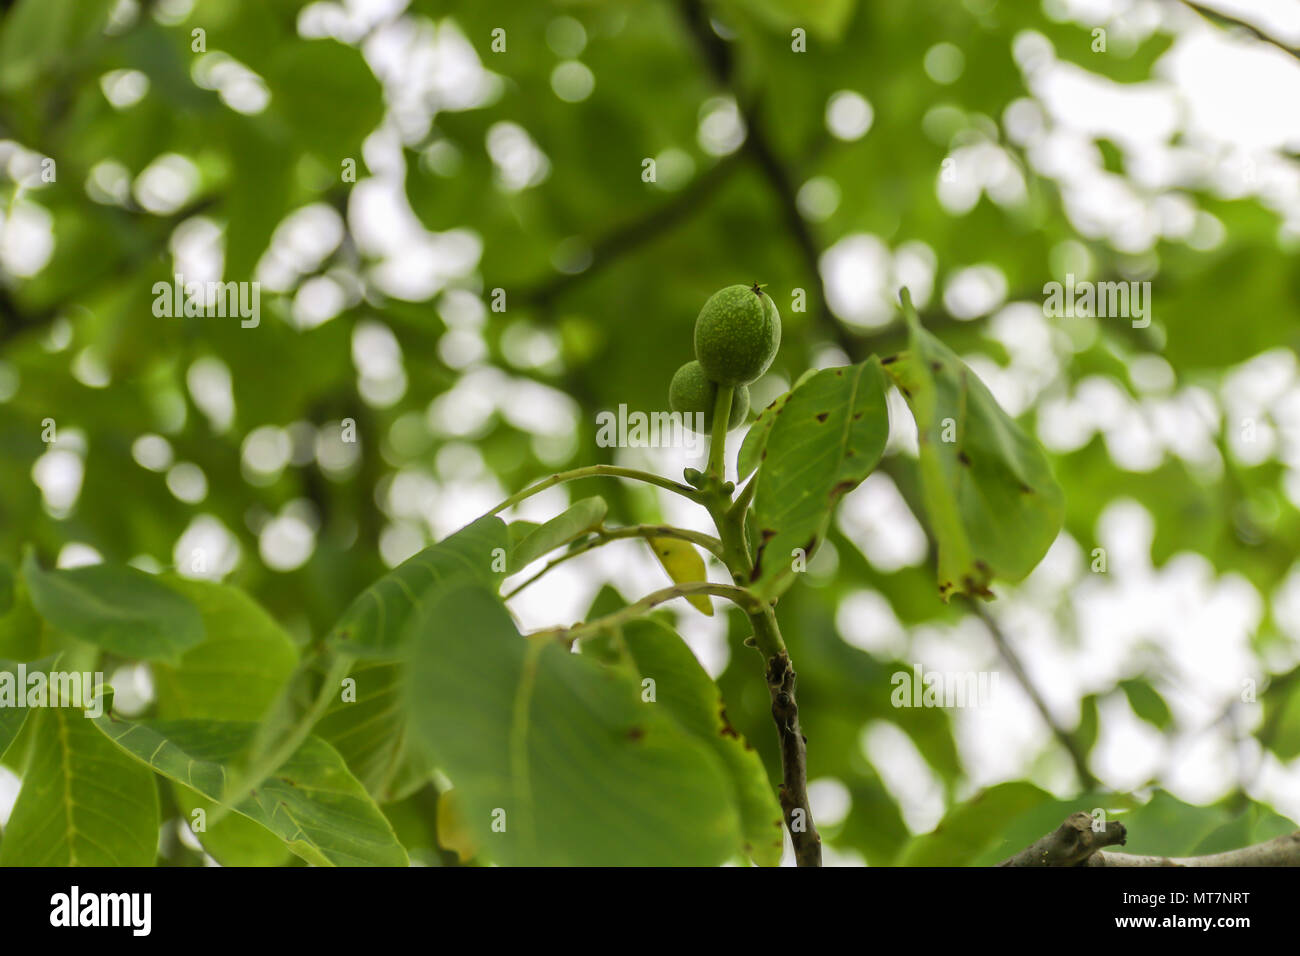 Young fruit of the walnut with green shell on branch with green leaves. Stock Photo